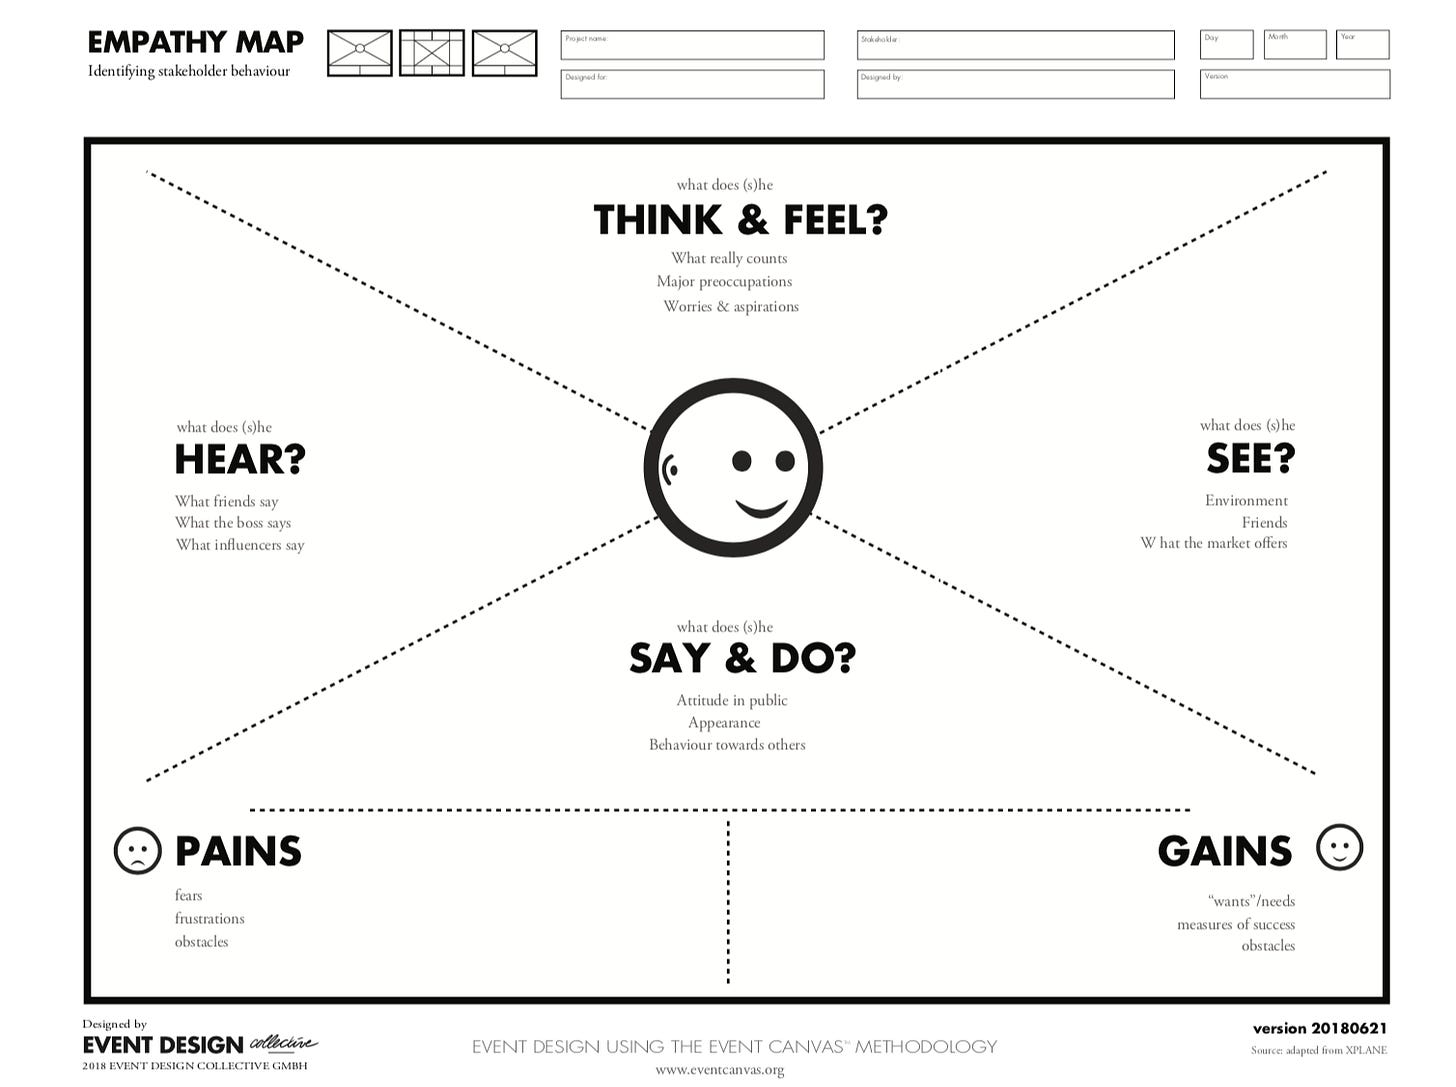 How to use the Empathy Map - Event Design Collective